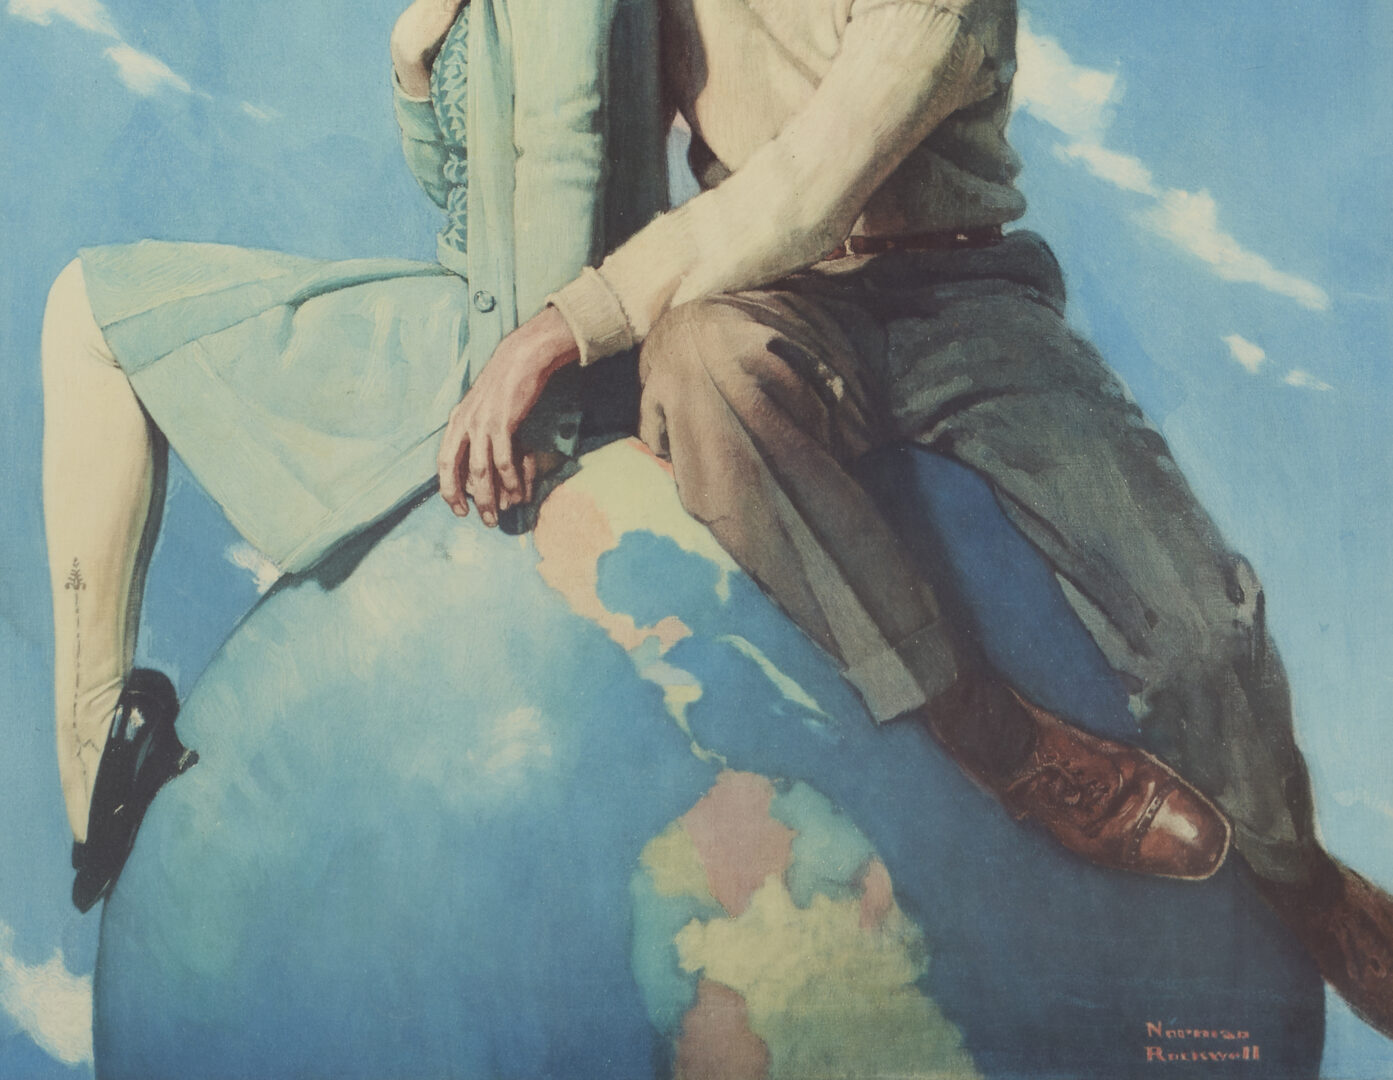 Lot 341: Norman Rockwell Signed Lithograph, Top of the World, 1928 Ladies' Home Journal Cover